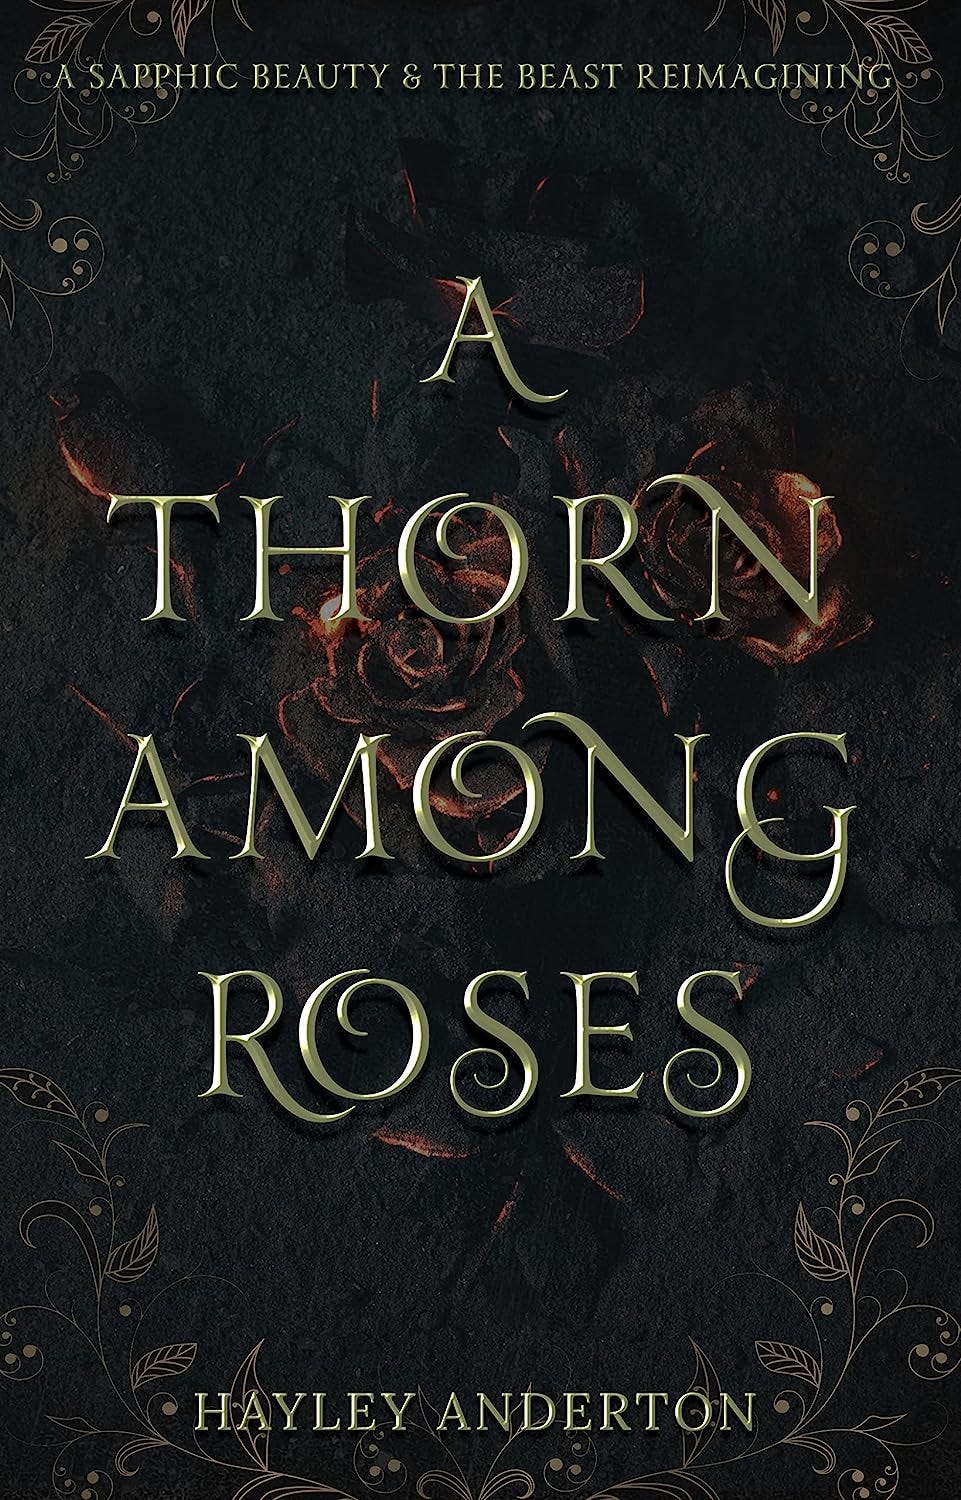 Book cover of A Thorn Among Roses by Hayley Anderton, showing a dark pattern of roses.